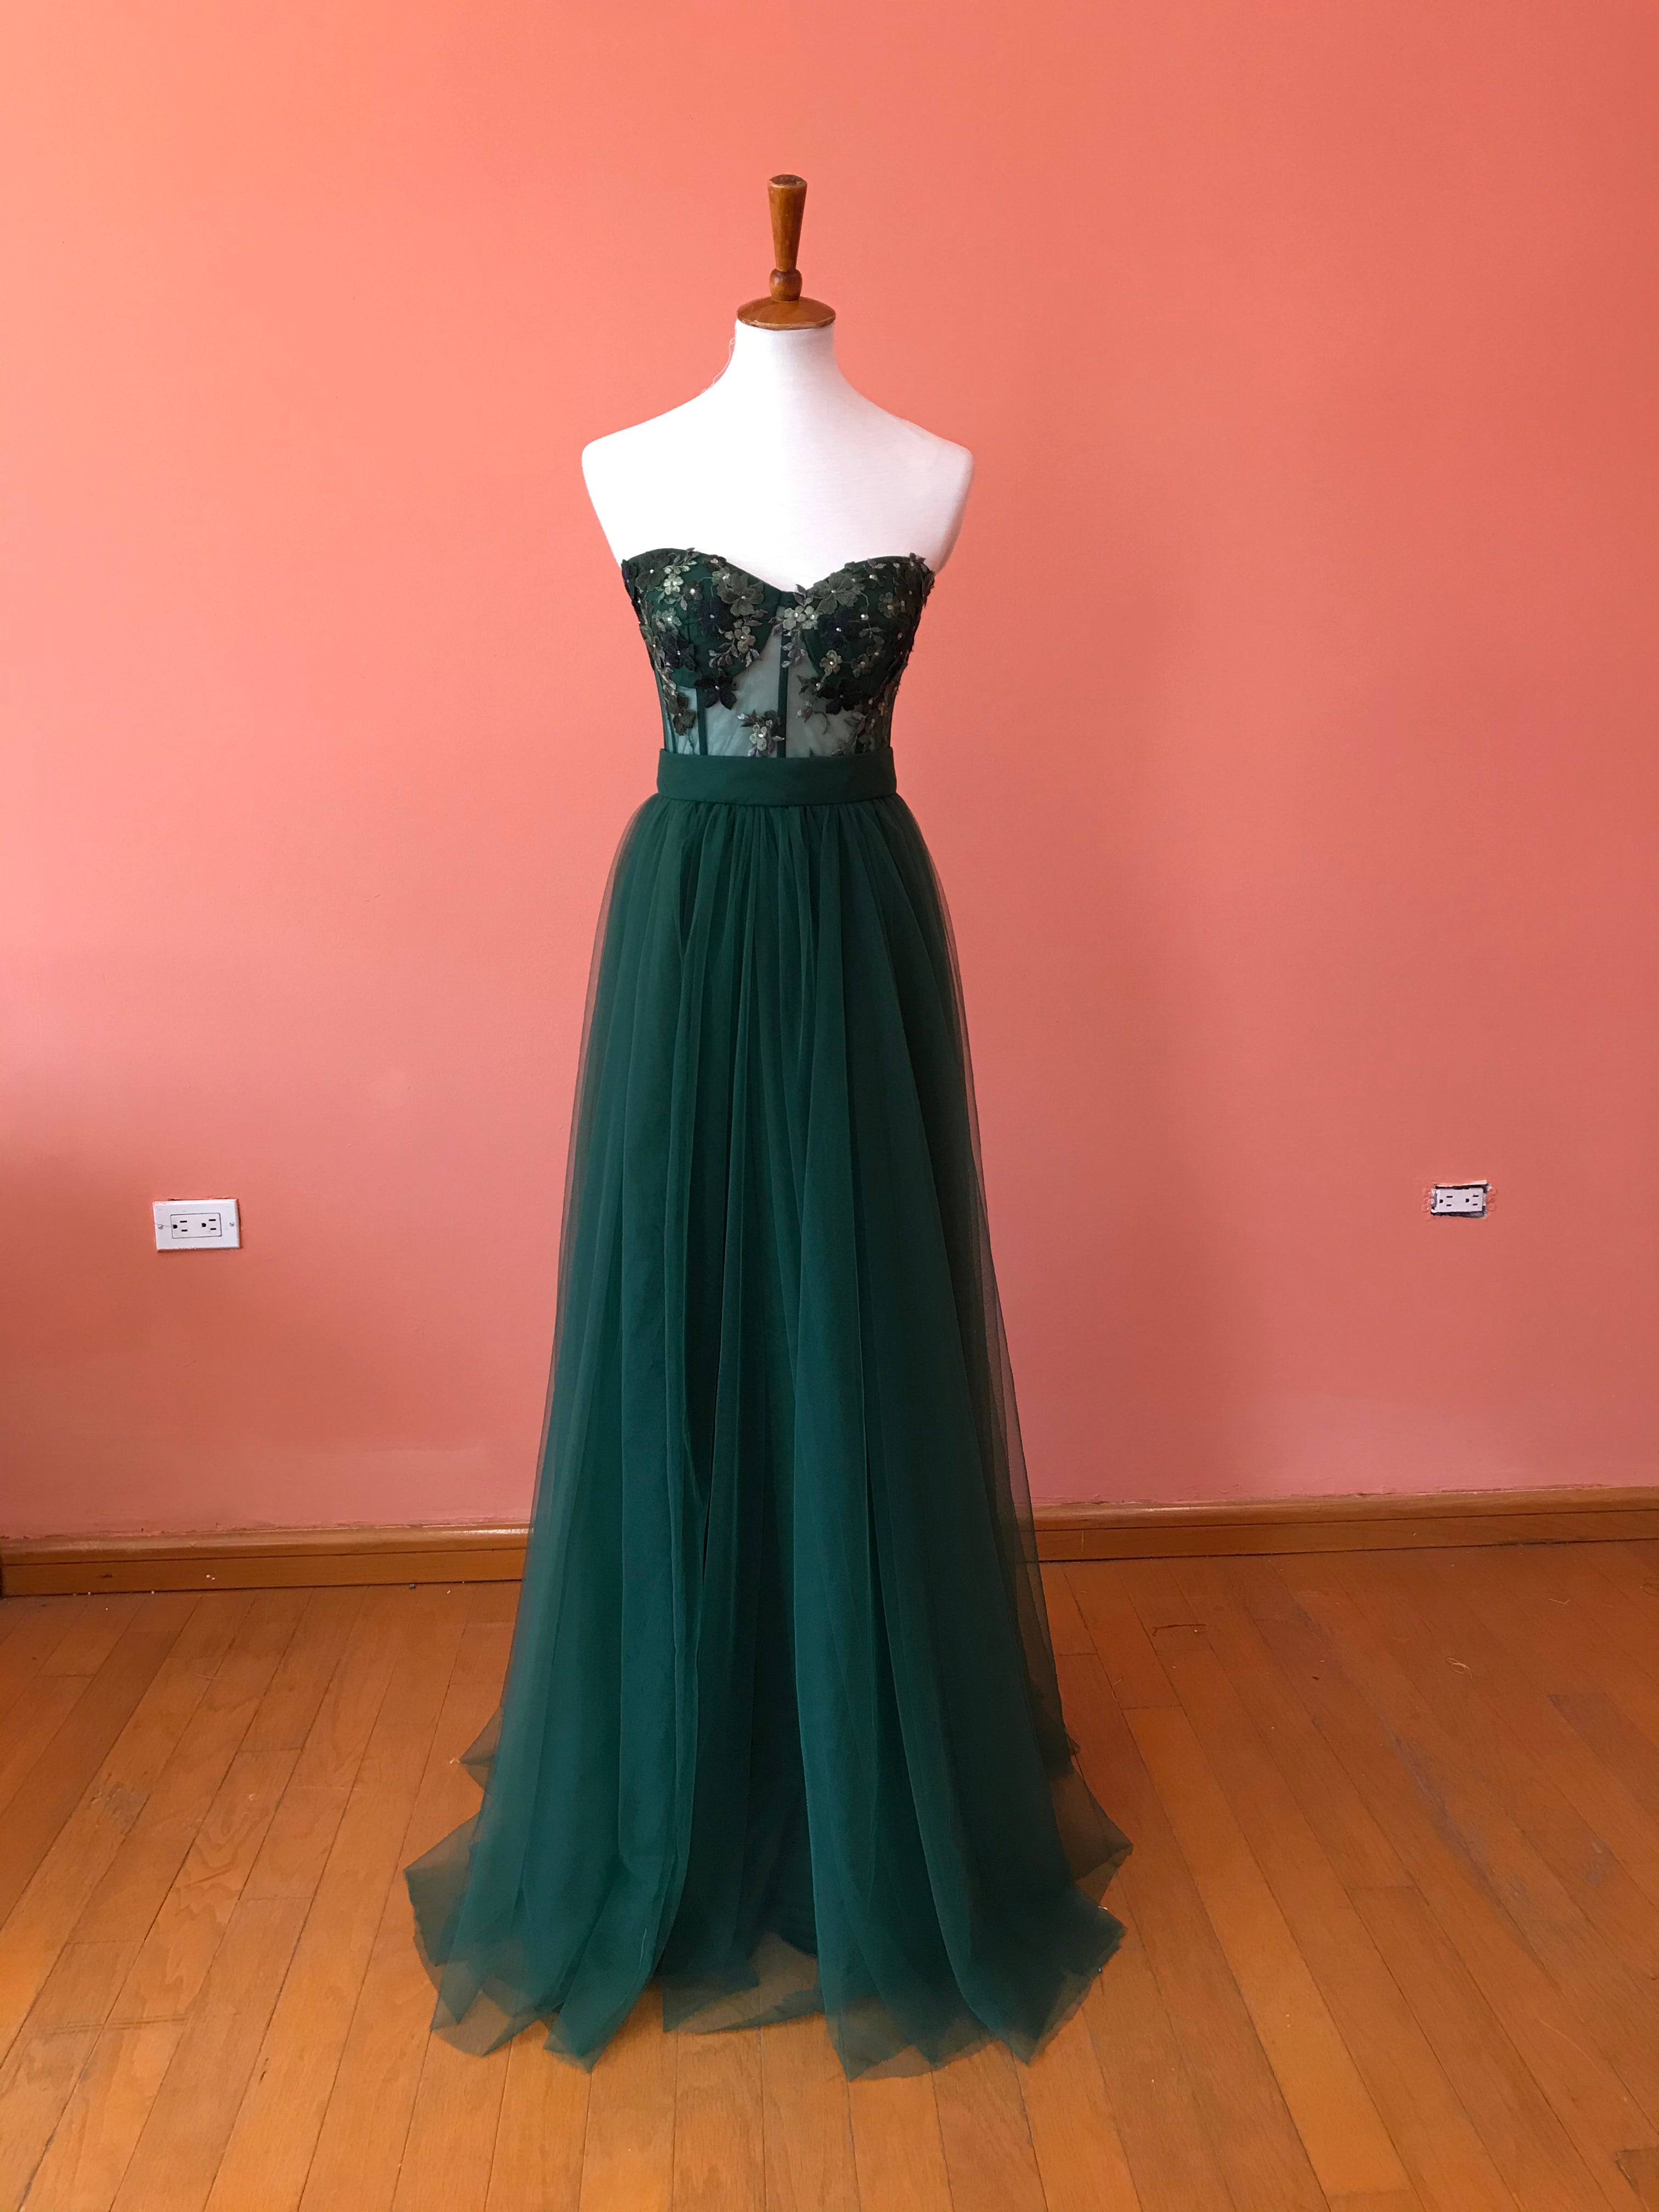 Short 3D flower bustier set and long tulle skirt Forest green Embroidered straps Size 8 and 10 cup A IMMEDIATE SHIPPING/DELIVERY